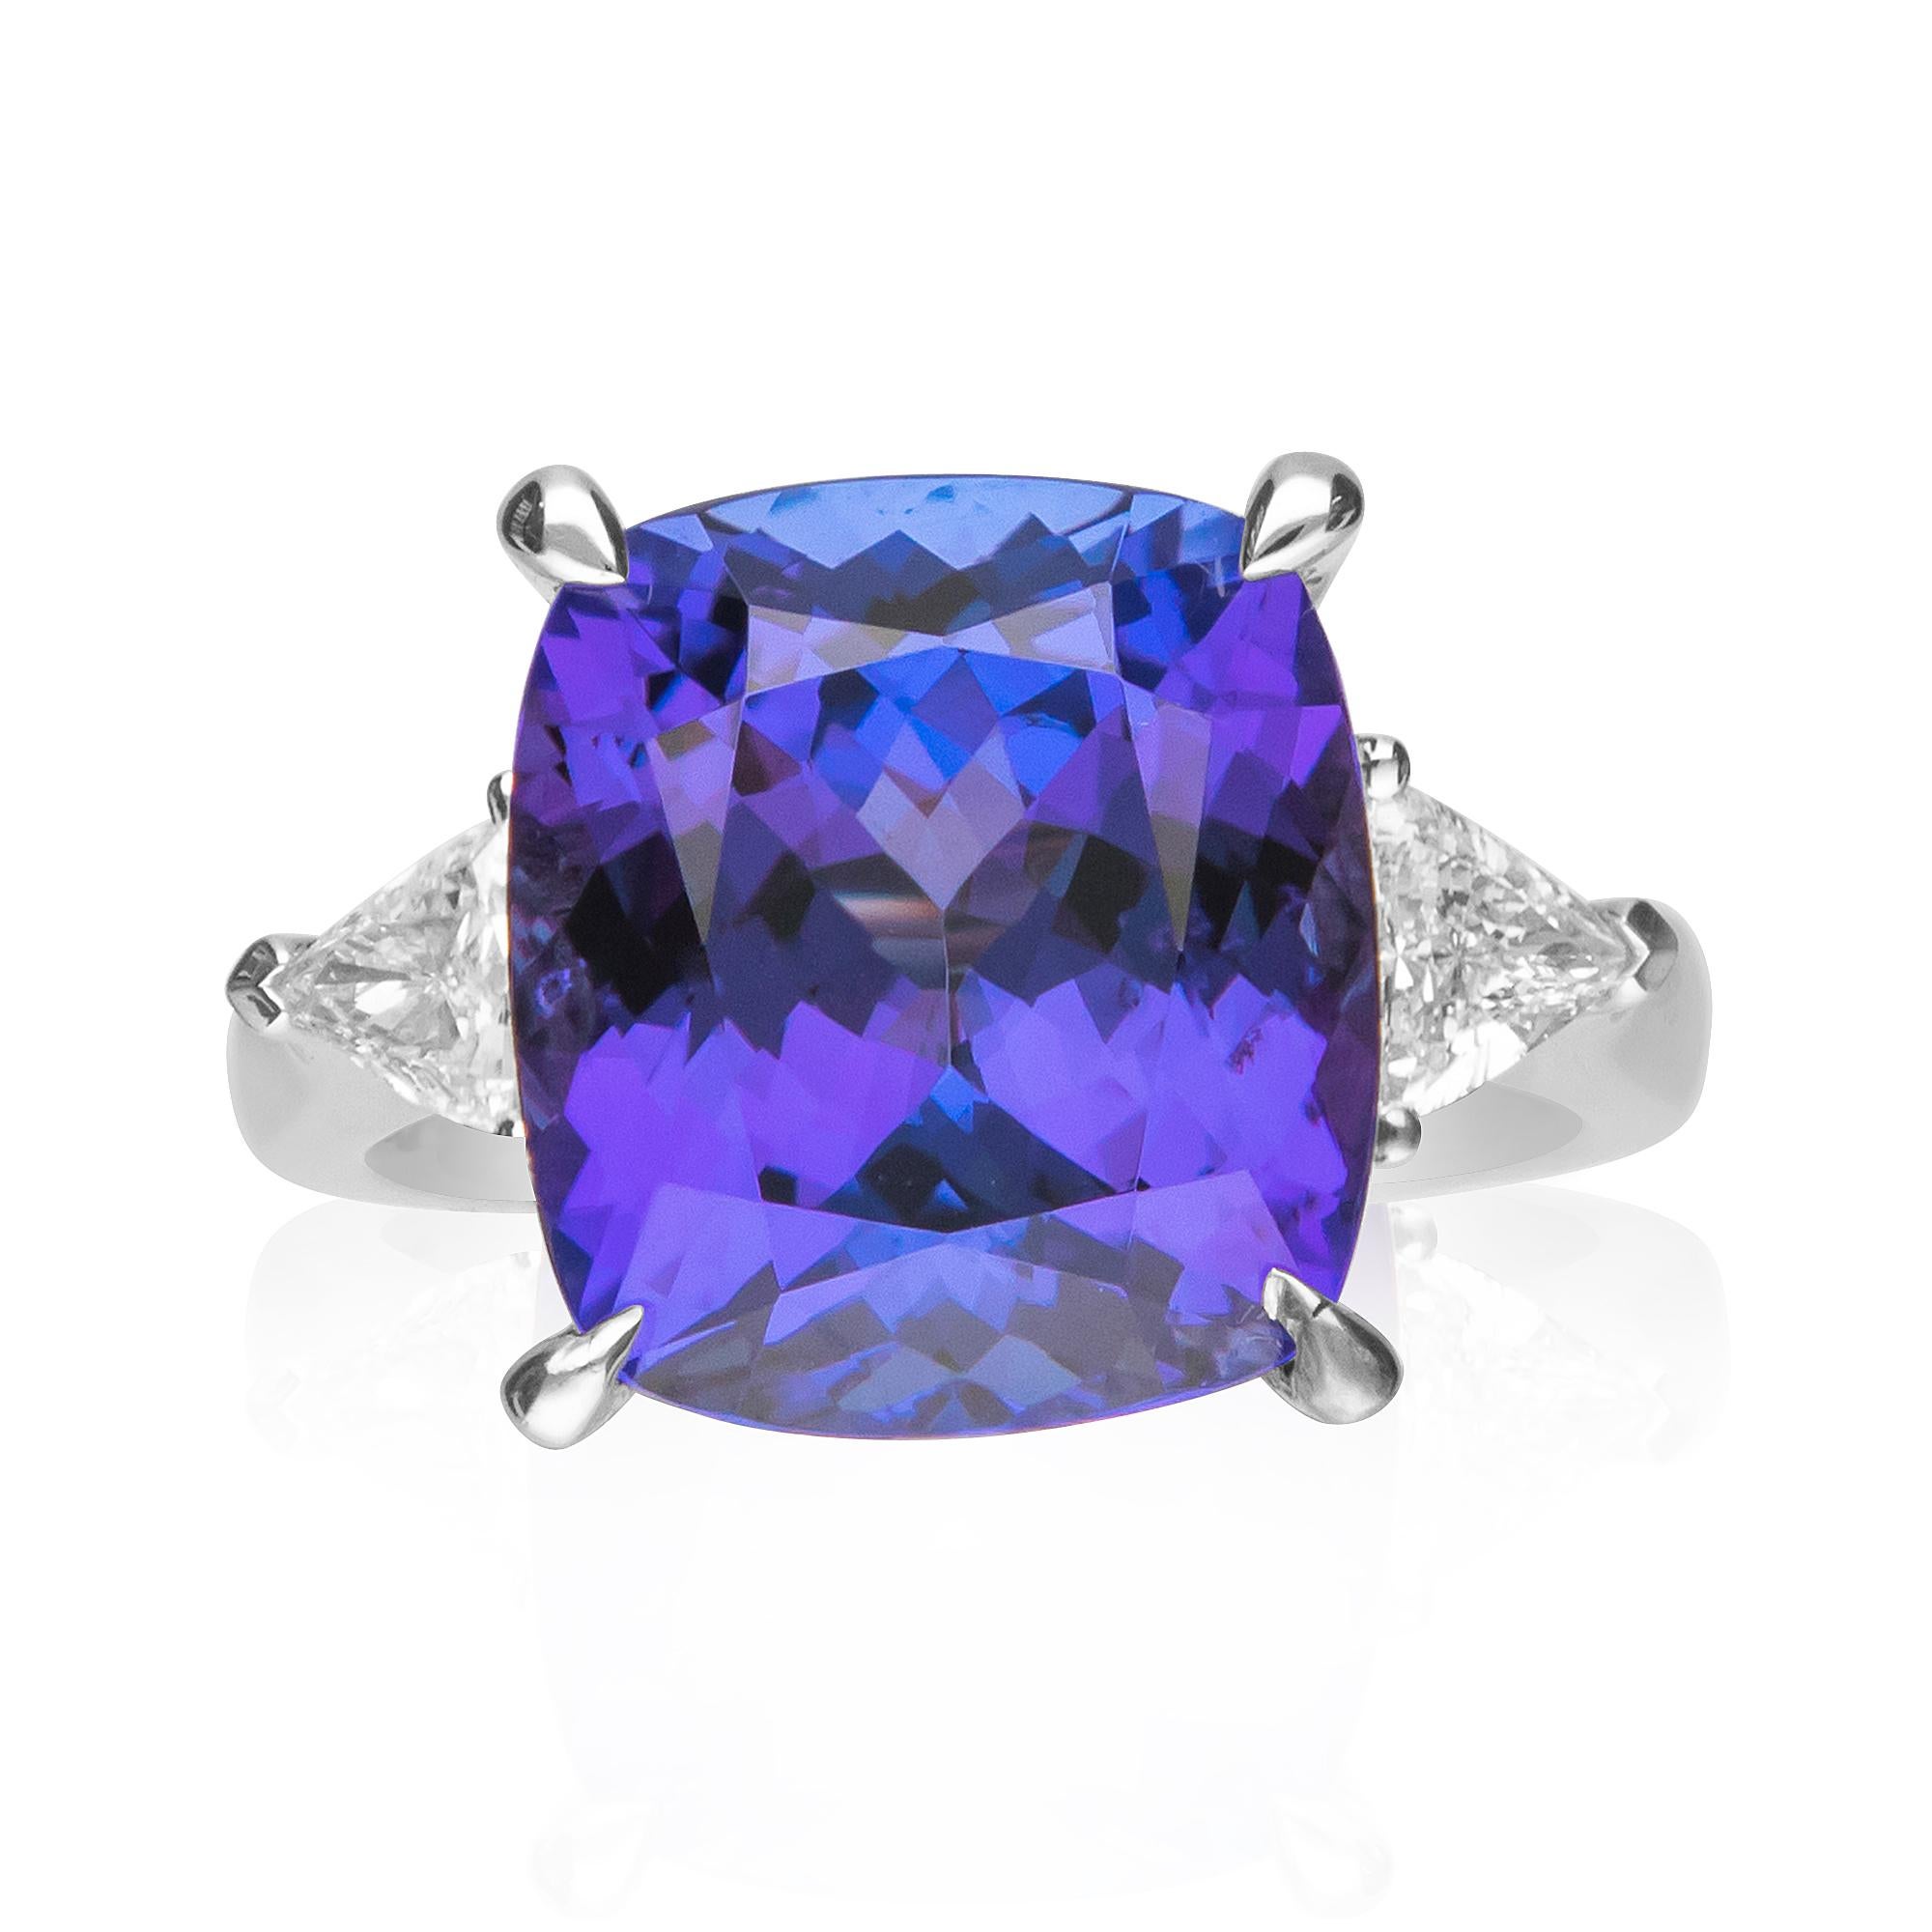 This classic engagement ring is crafted in 18-karat White gold and features an 11.35 Carat Cushion cut Tanzanite and 2 Trillion cut Diamonds 0.51 Ct. GH- SI quality. This ring comes in size 7 and is a perfect gift either for yourself or someone you